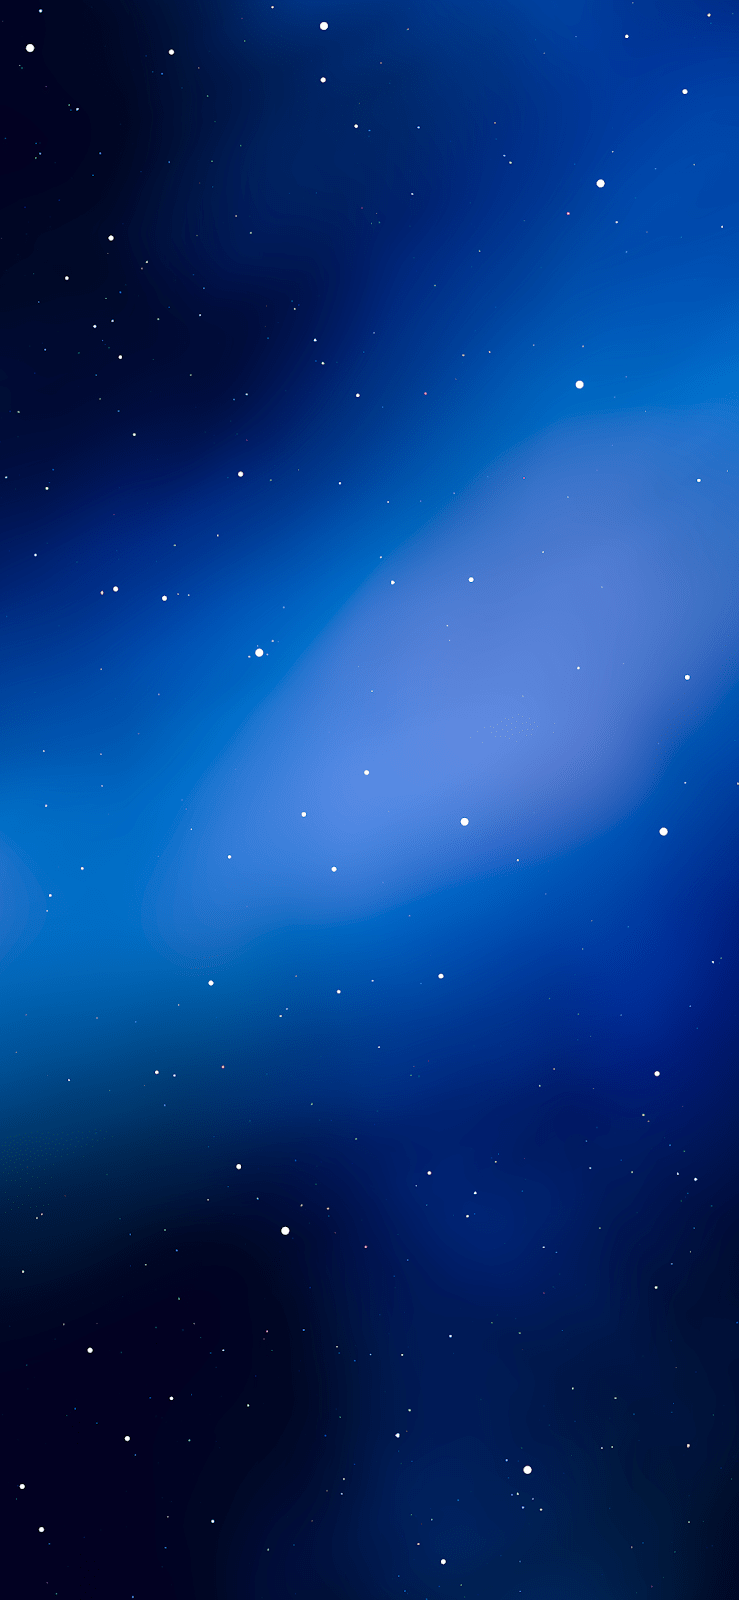 A blue sky with stars and clouds - Galaxy, navy blue, dark blue